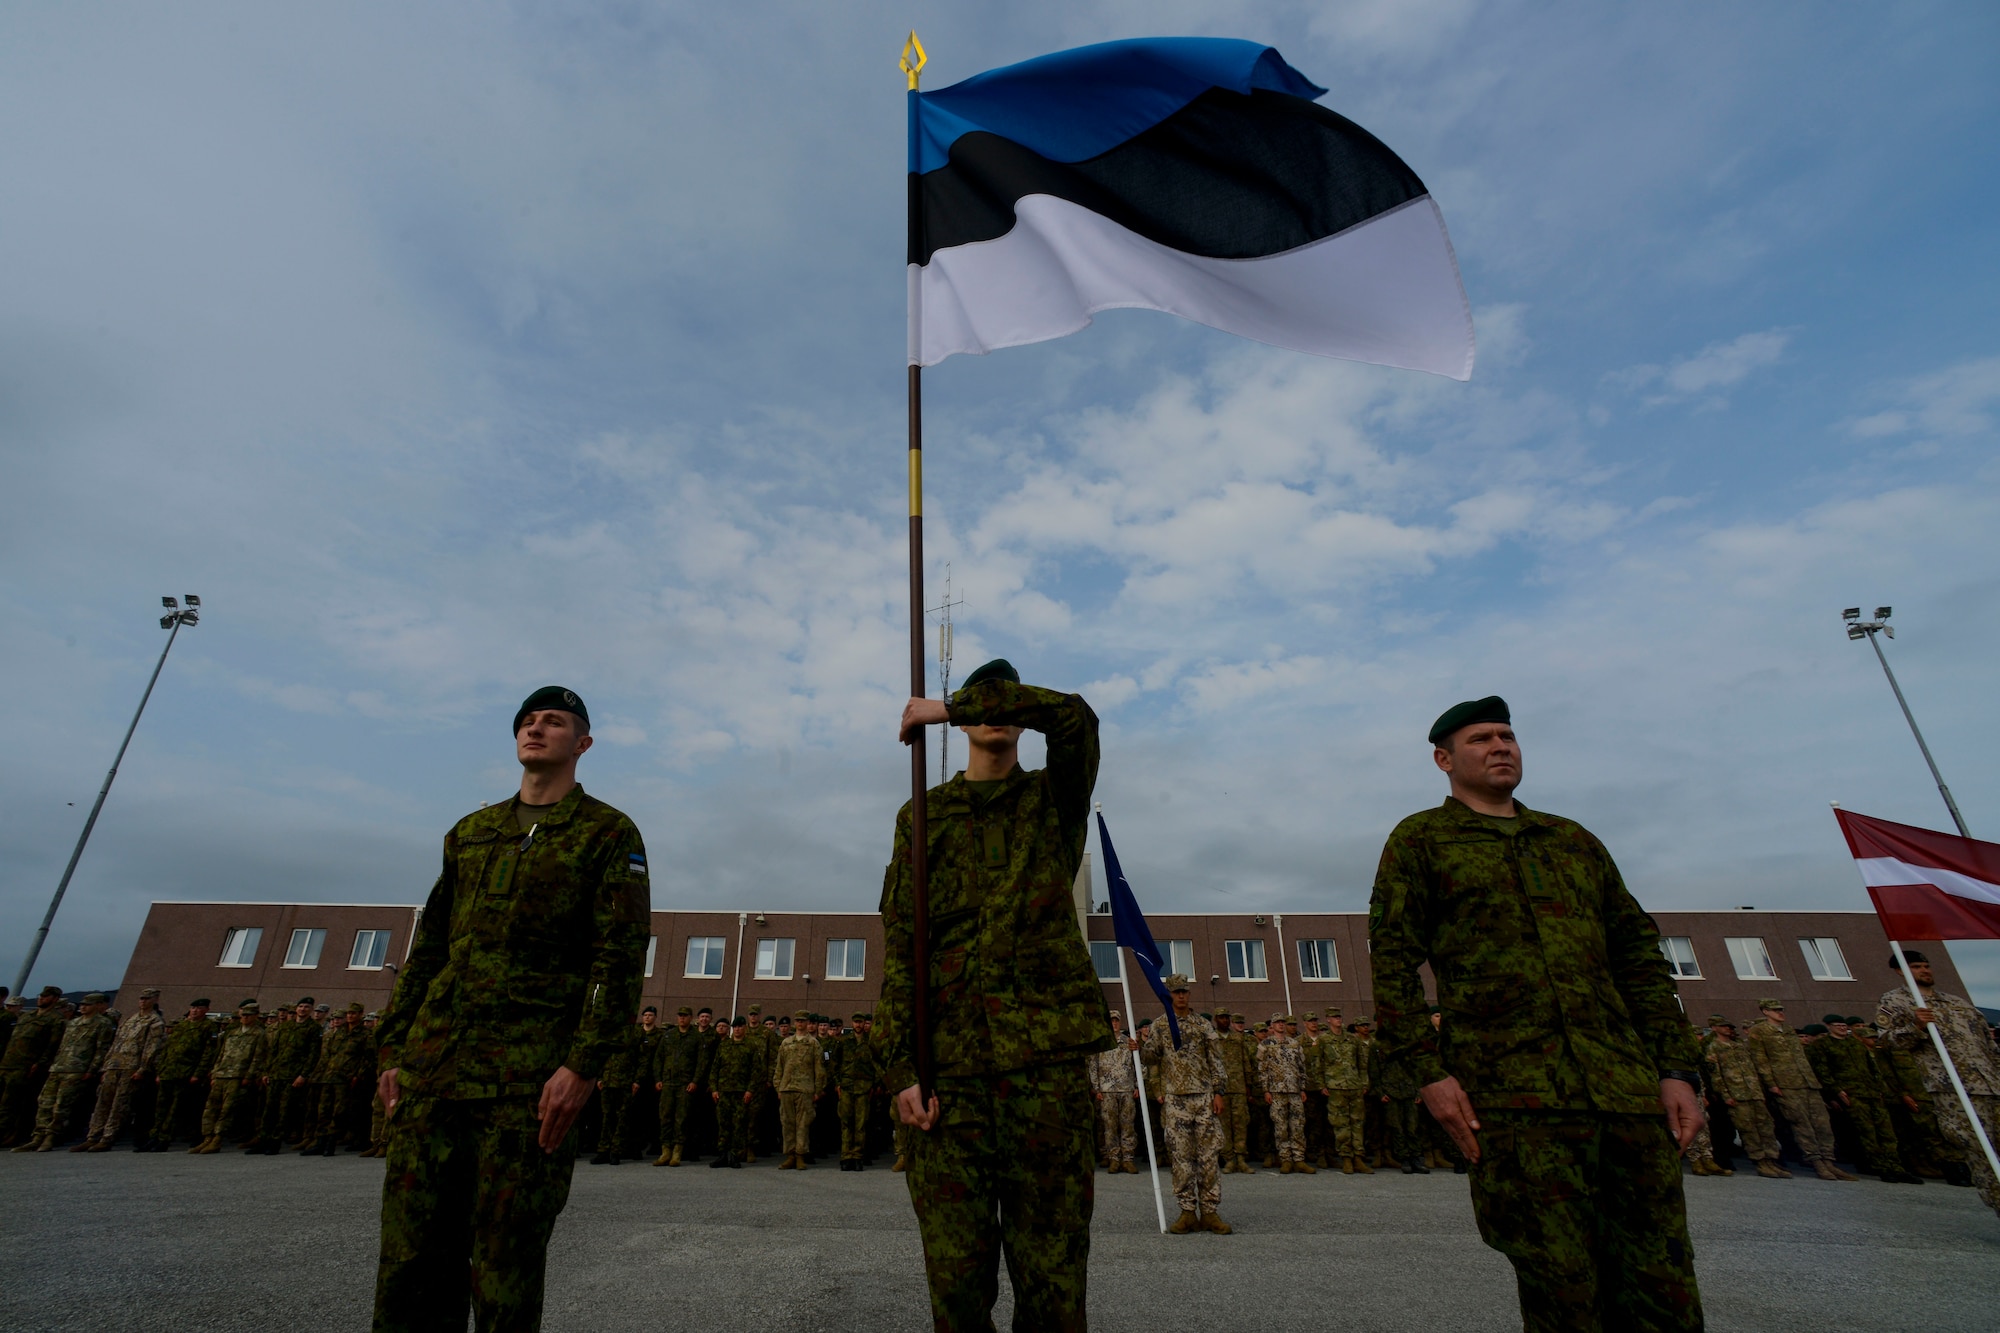 Estonian soldiers present the colors during the closing ceremony for Saber Strike 16 at Tapa Training Base, Estonia, June 21, 2016. U.S. forces in Europe participated in Saber Strike 16; a long-standing, U.S. Joint Chiefs of Staff-directed, U.S. Army Europe-led cooperative-training exercise, which has been conducted annually since 2010.  This year’s exercise focused on promoting interoperability with allies and regional partners. The United States has enduring interests in supporting peace and prosperity in Europe and bolstering the strength and vitality of NATO, which is critical to global security. (U.S. Air Force photo/Senior Airman Nicole Keim)